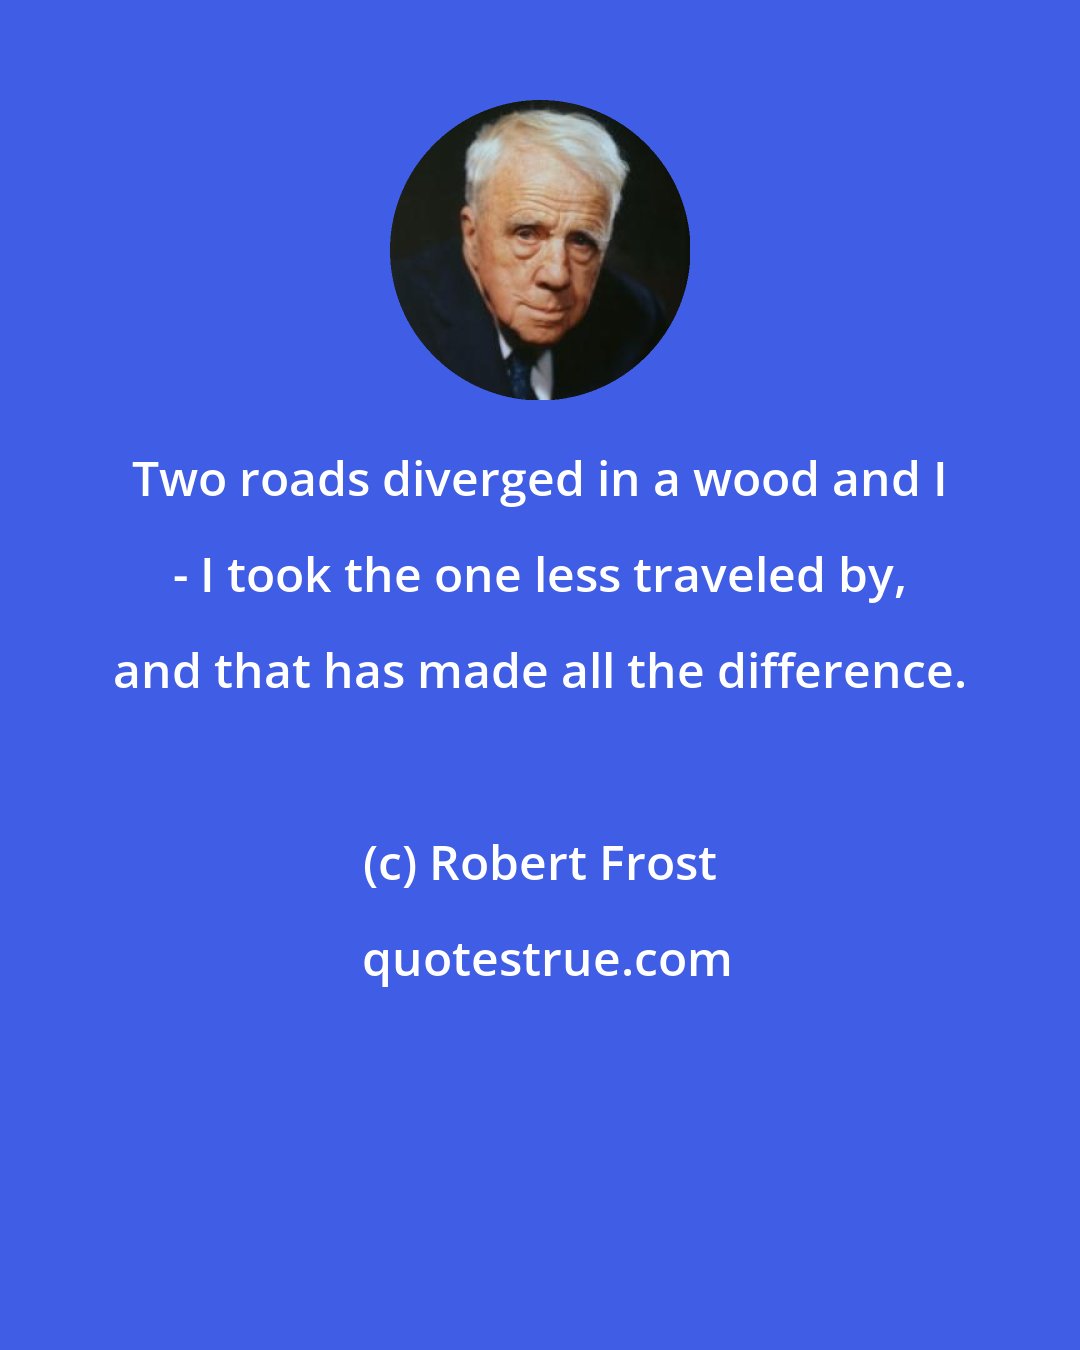 Robert Frost: Two roads diverged in a wood and I - I took the one less traveled by, and that has made all the difference.